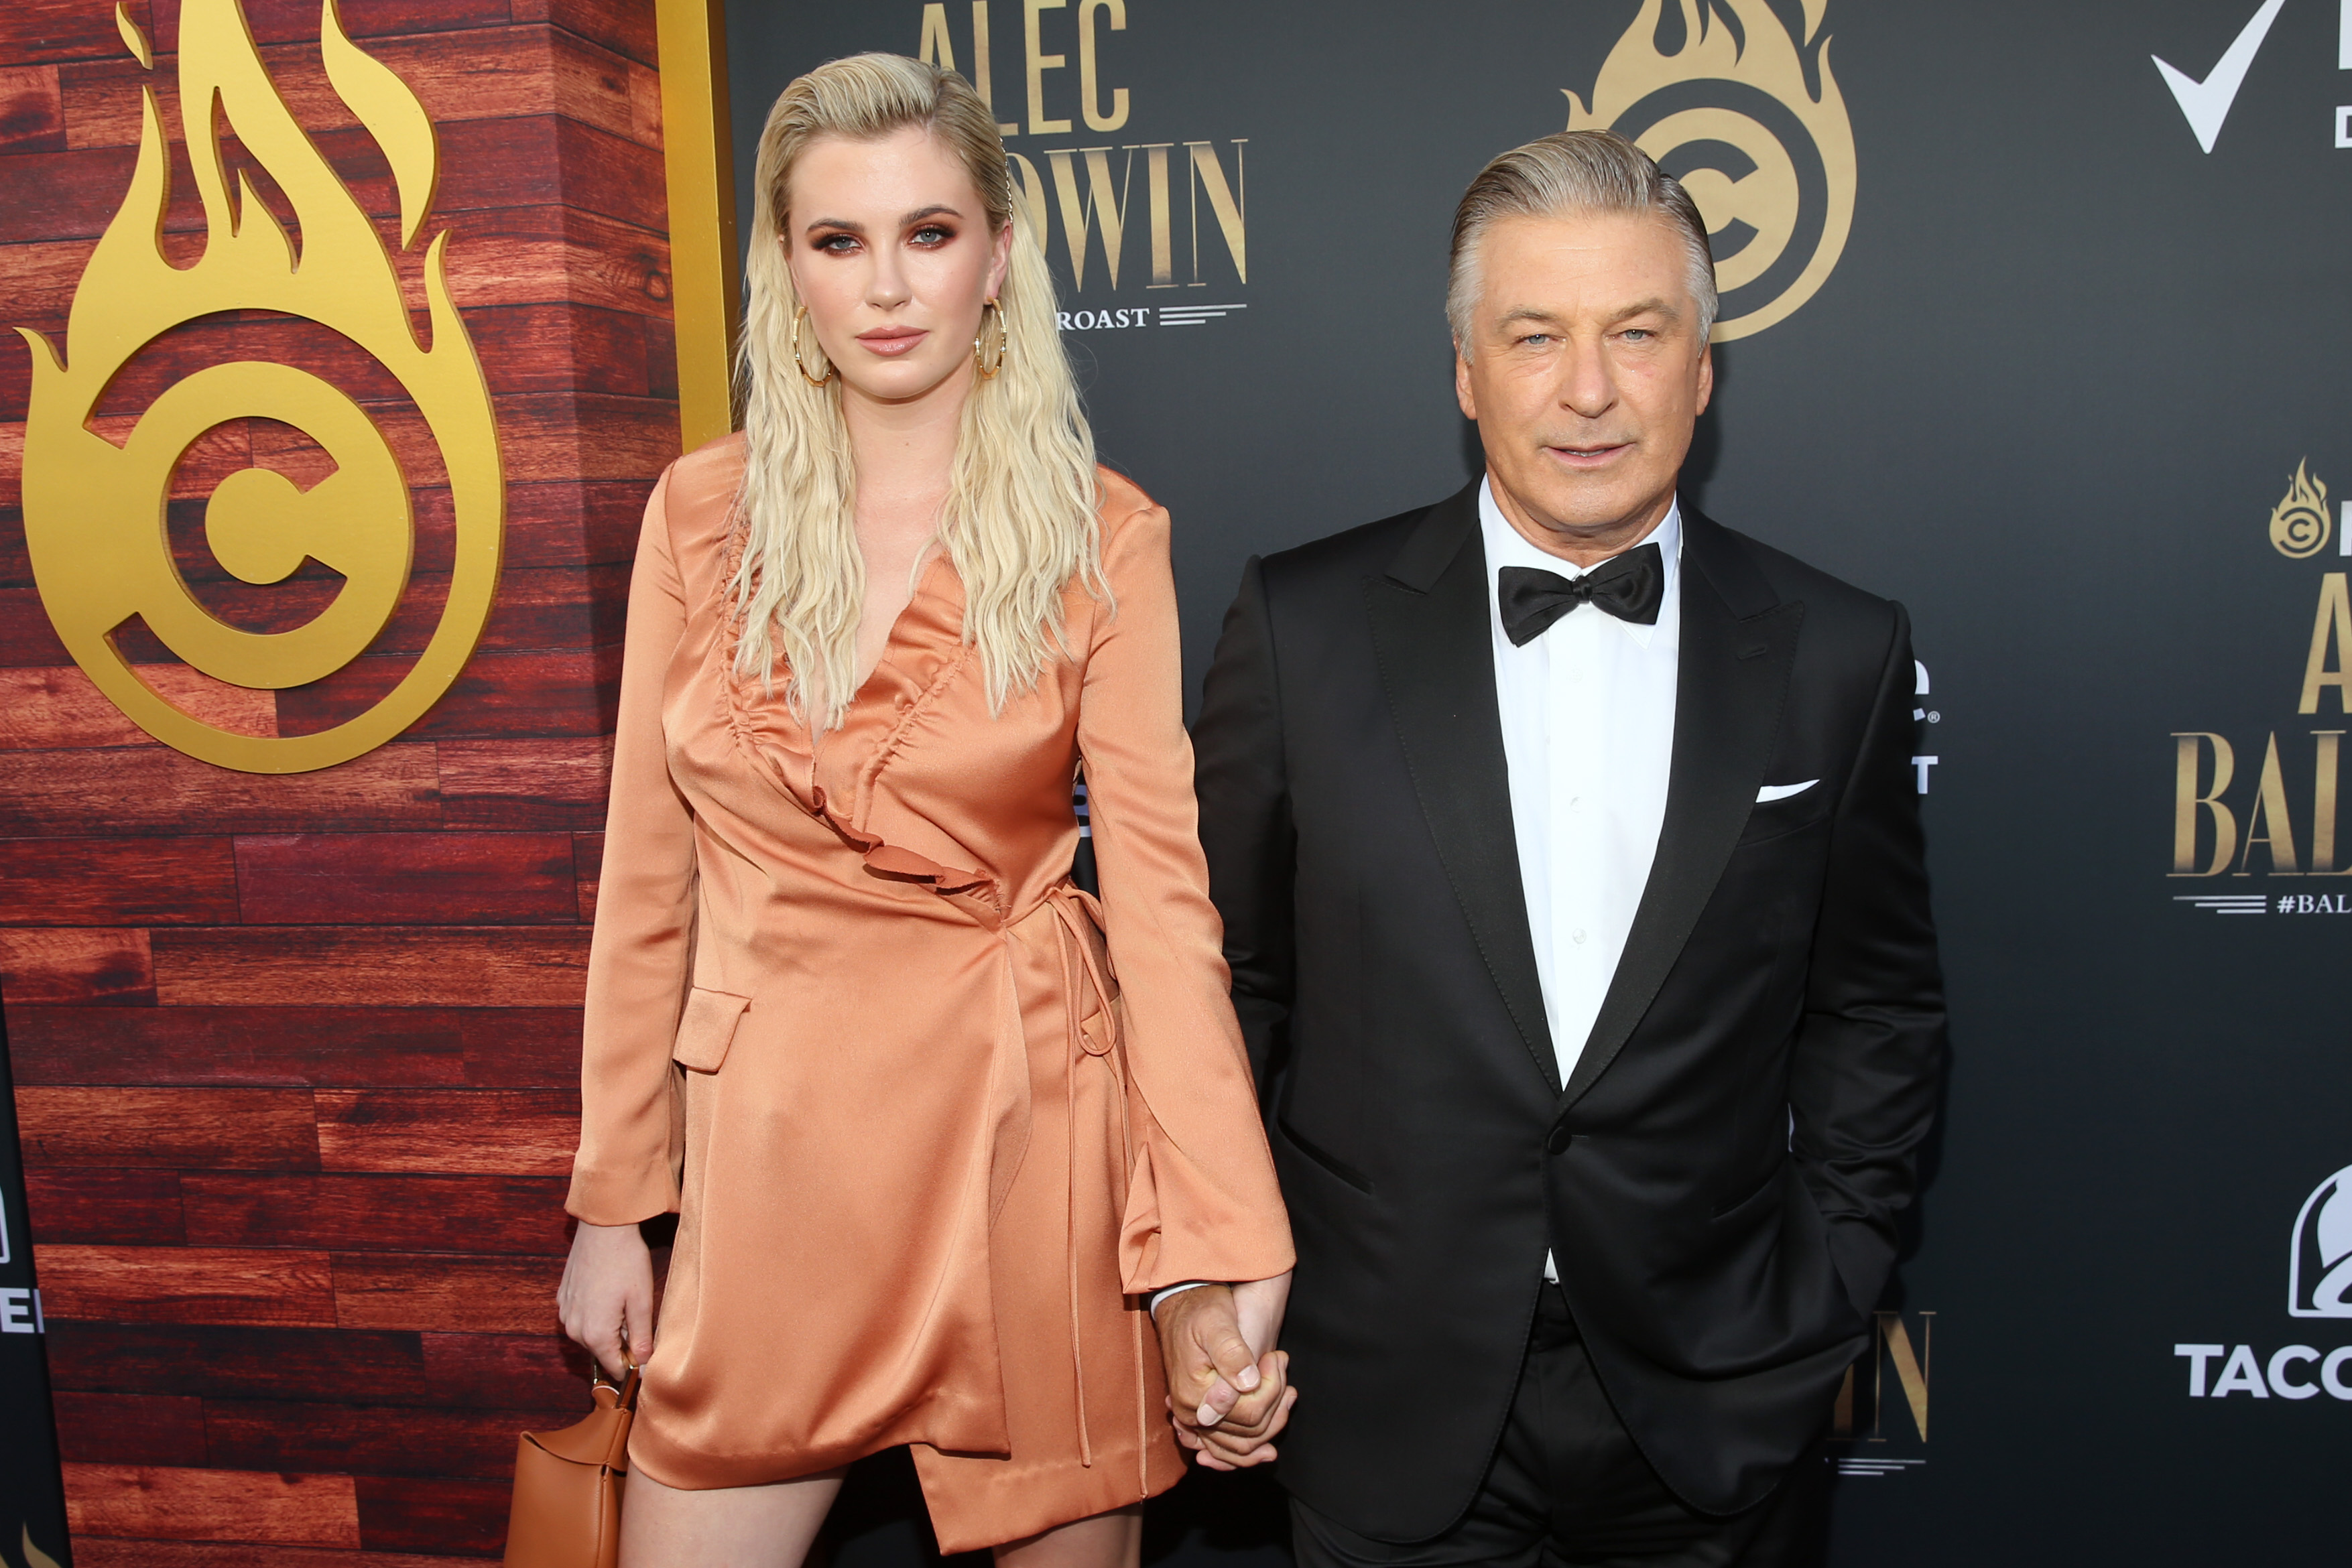 Ireland Baldwin and Alec Baldwin in Beverly Hills, California on September 07, 2019 | Source: Getty Images